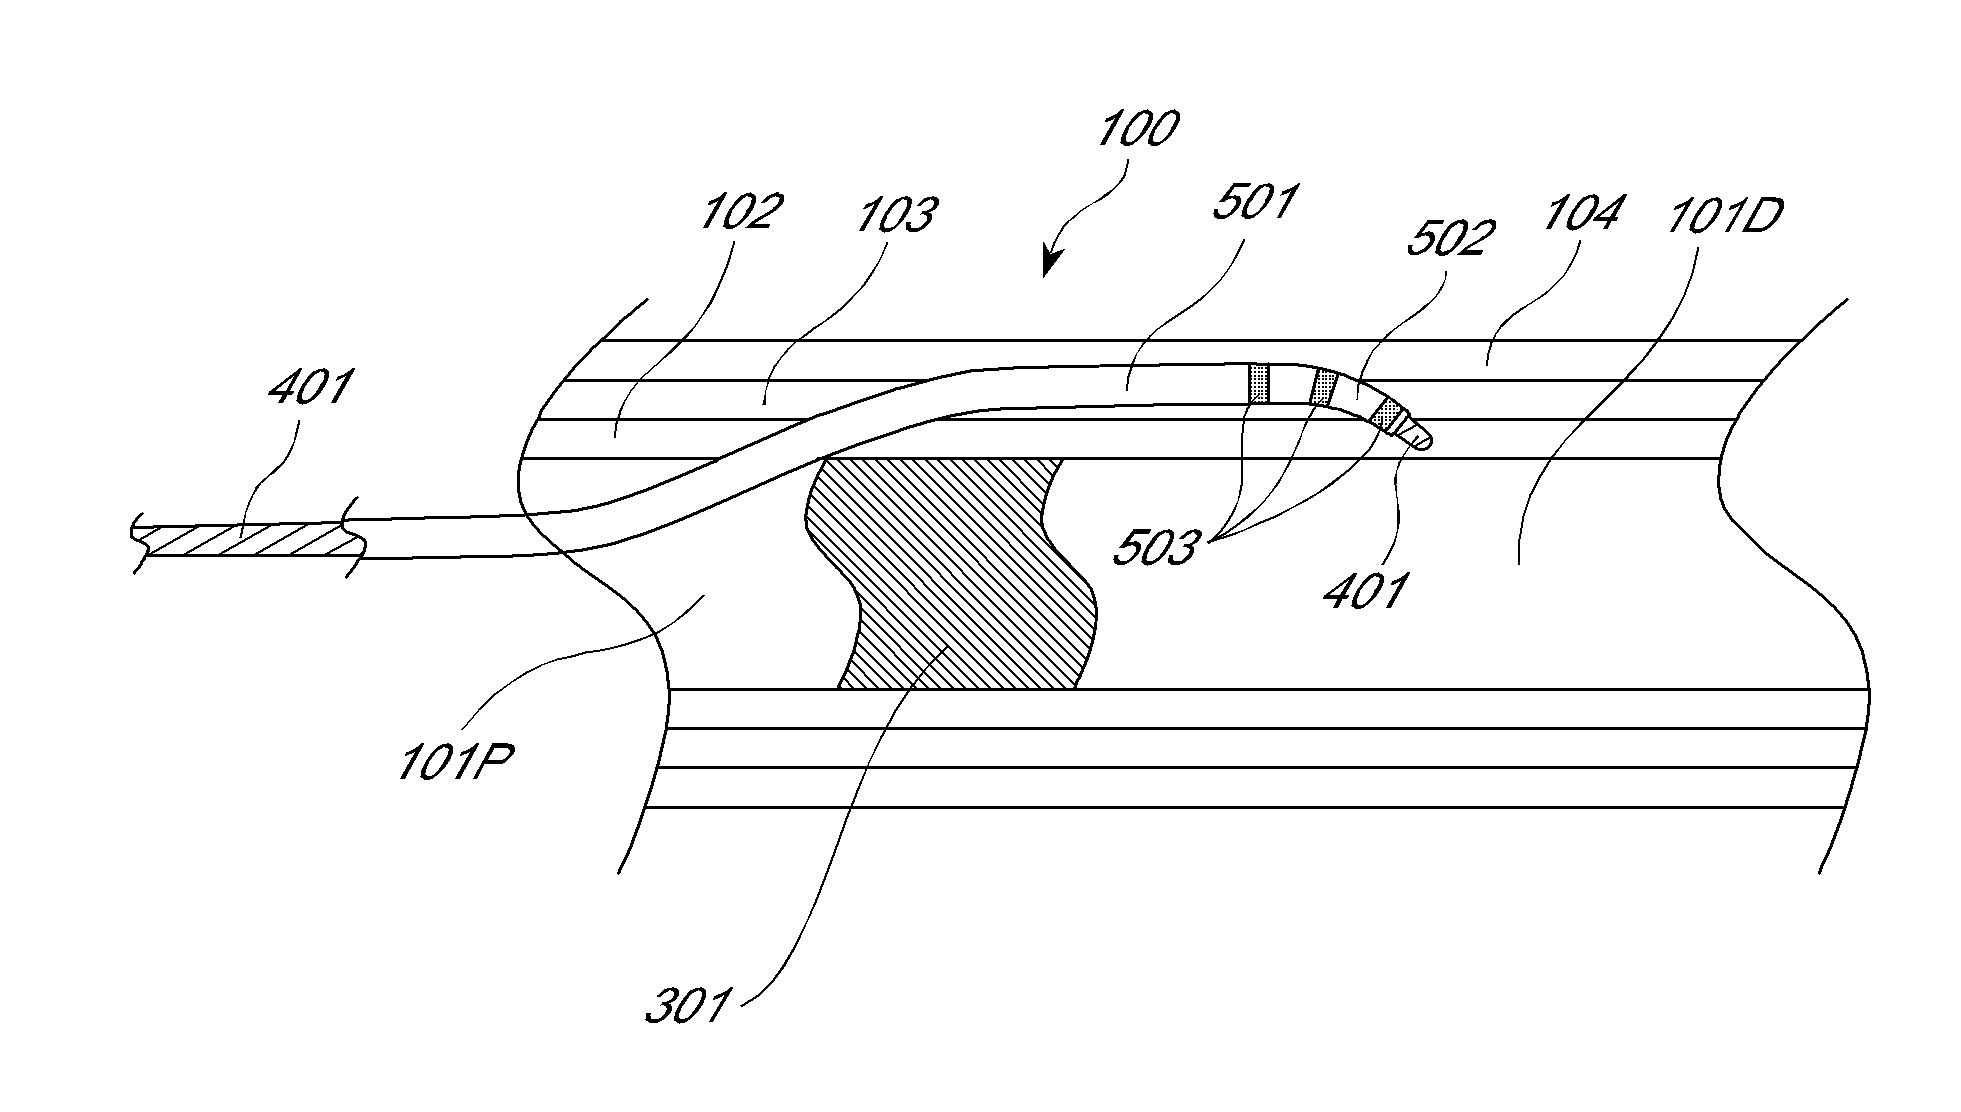 Device and method for vascular re-entry